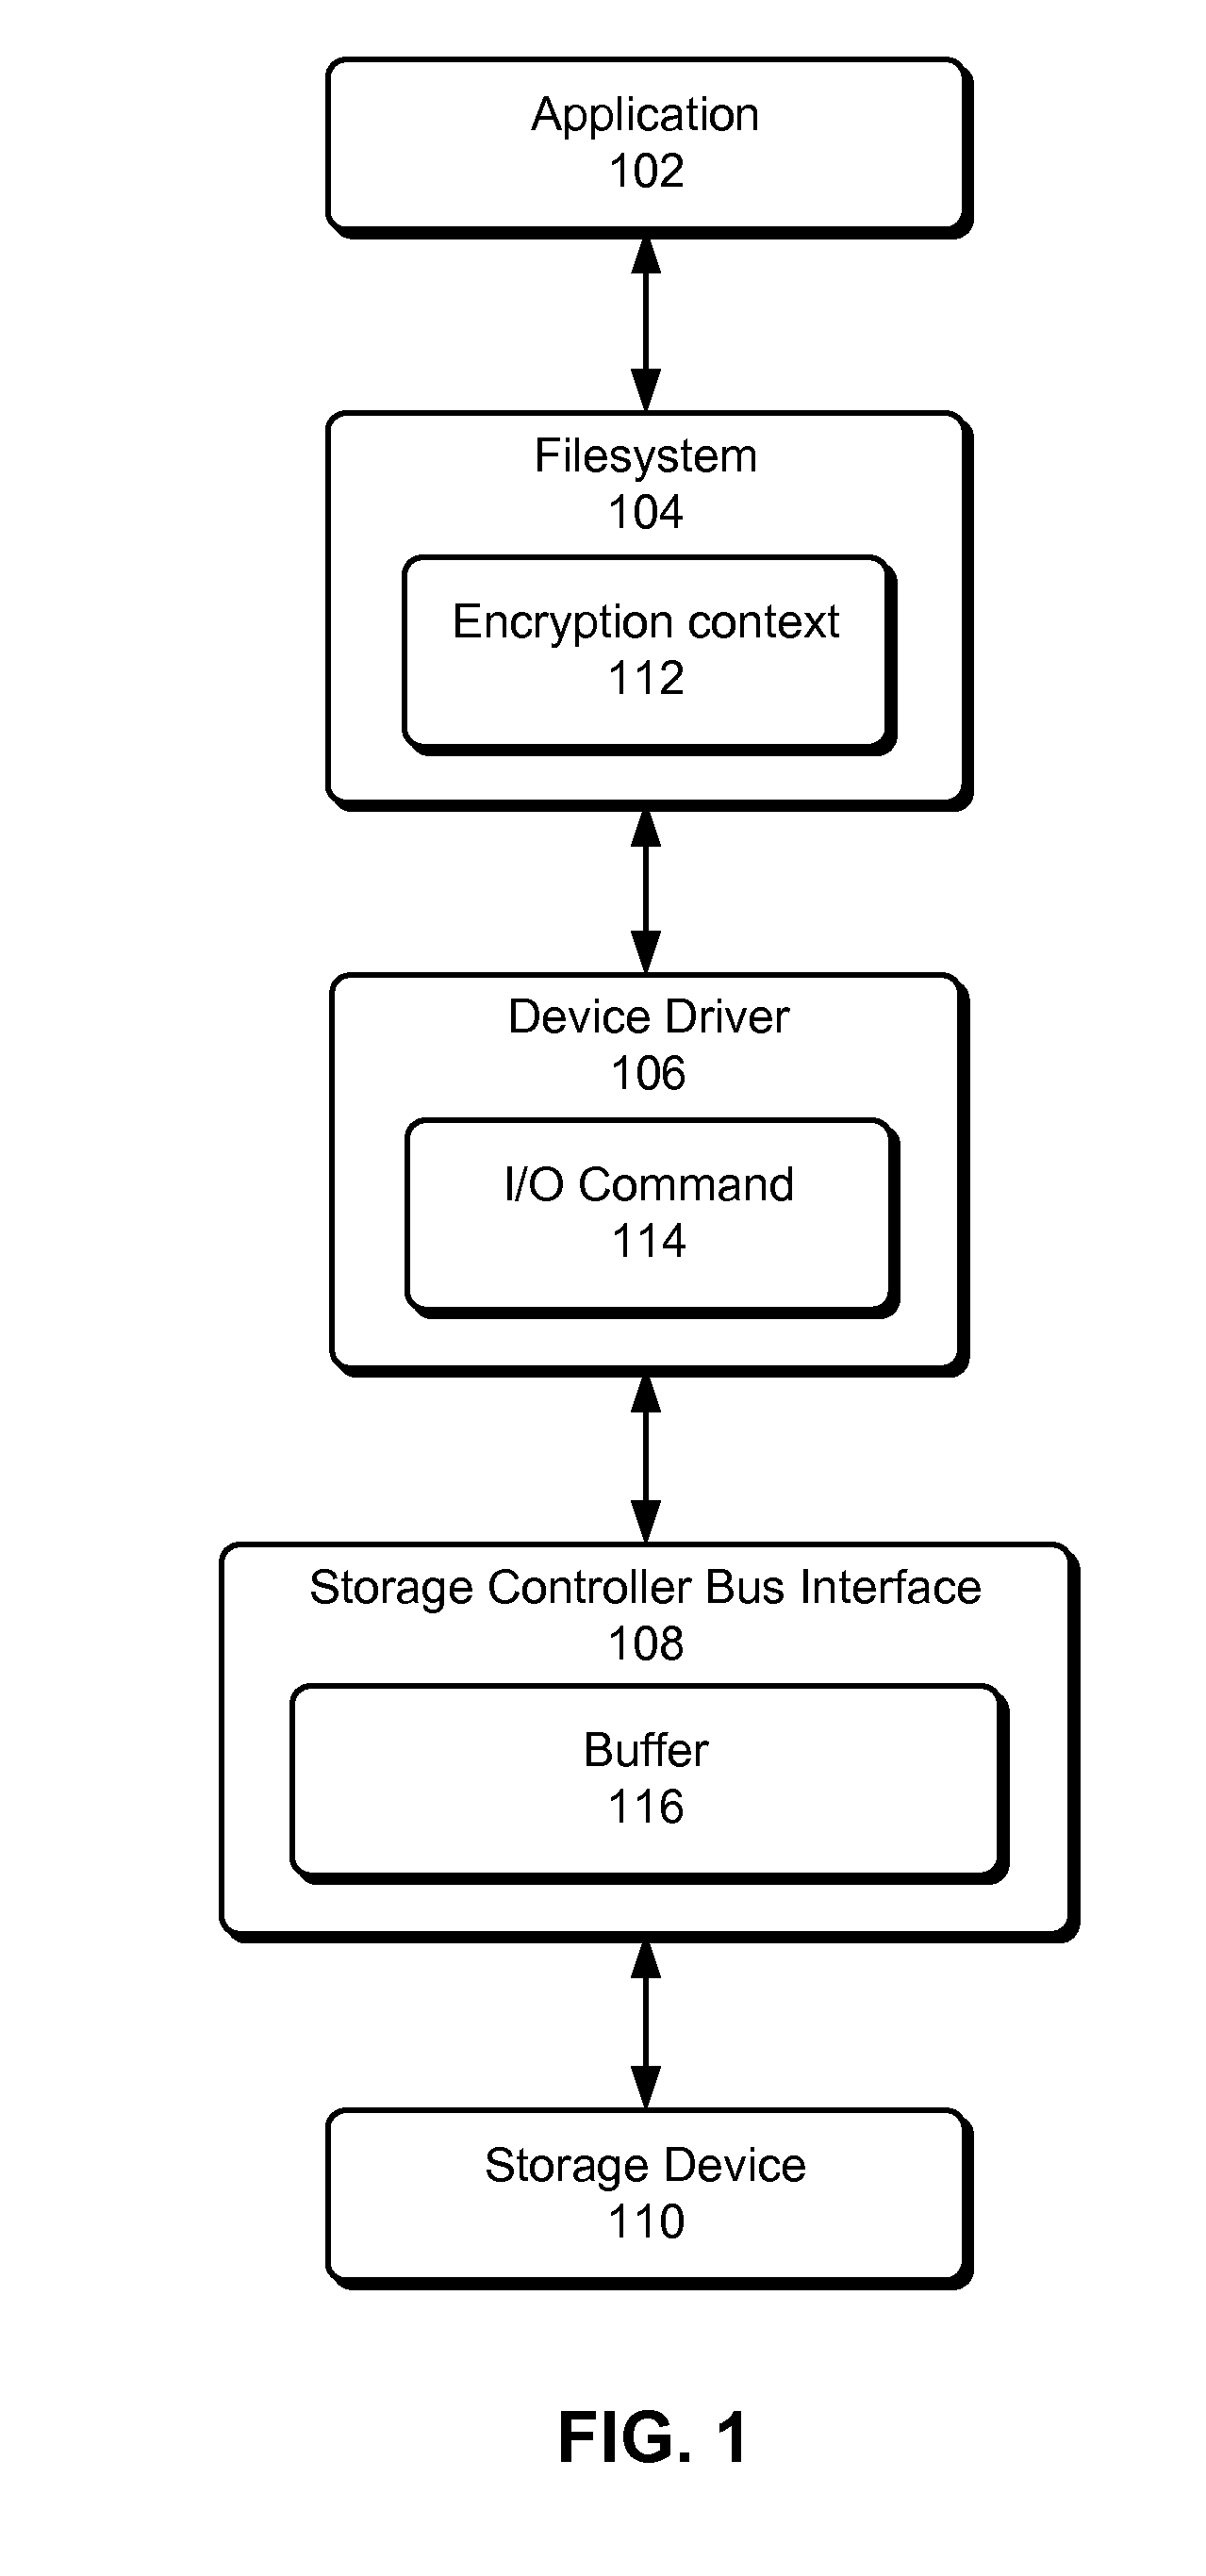 Using storage controller bus interfaces to secure data transfer between storage devices and hosts